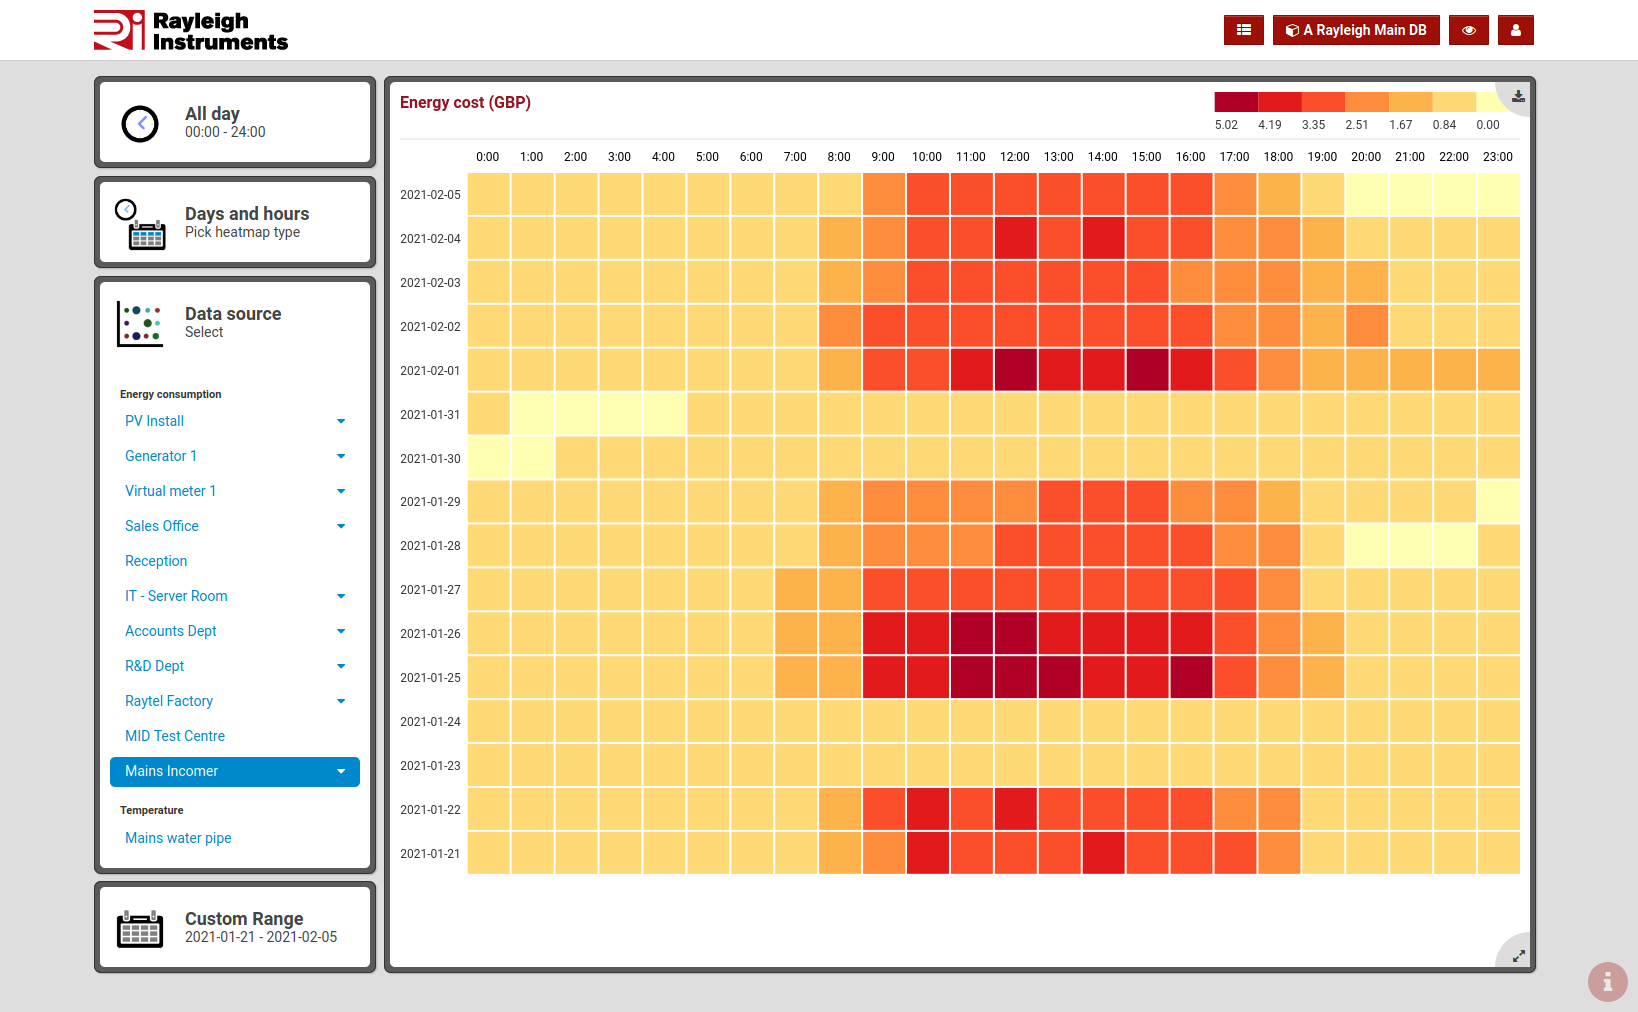 Heat map showing energy cost over multiple days.